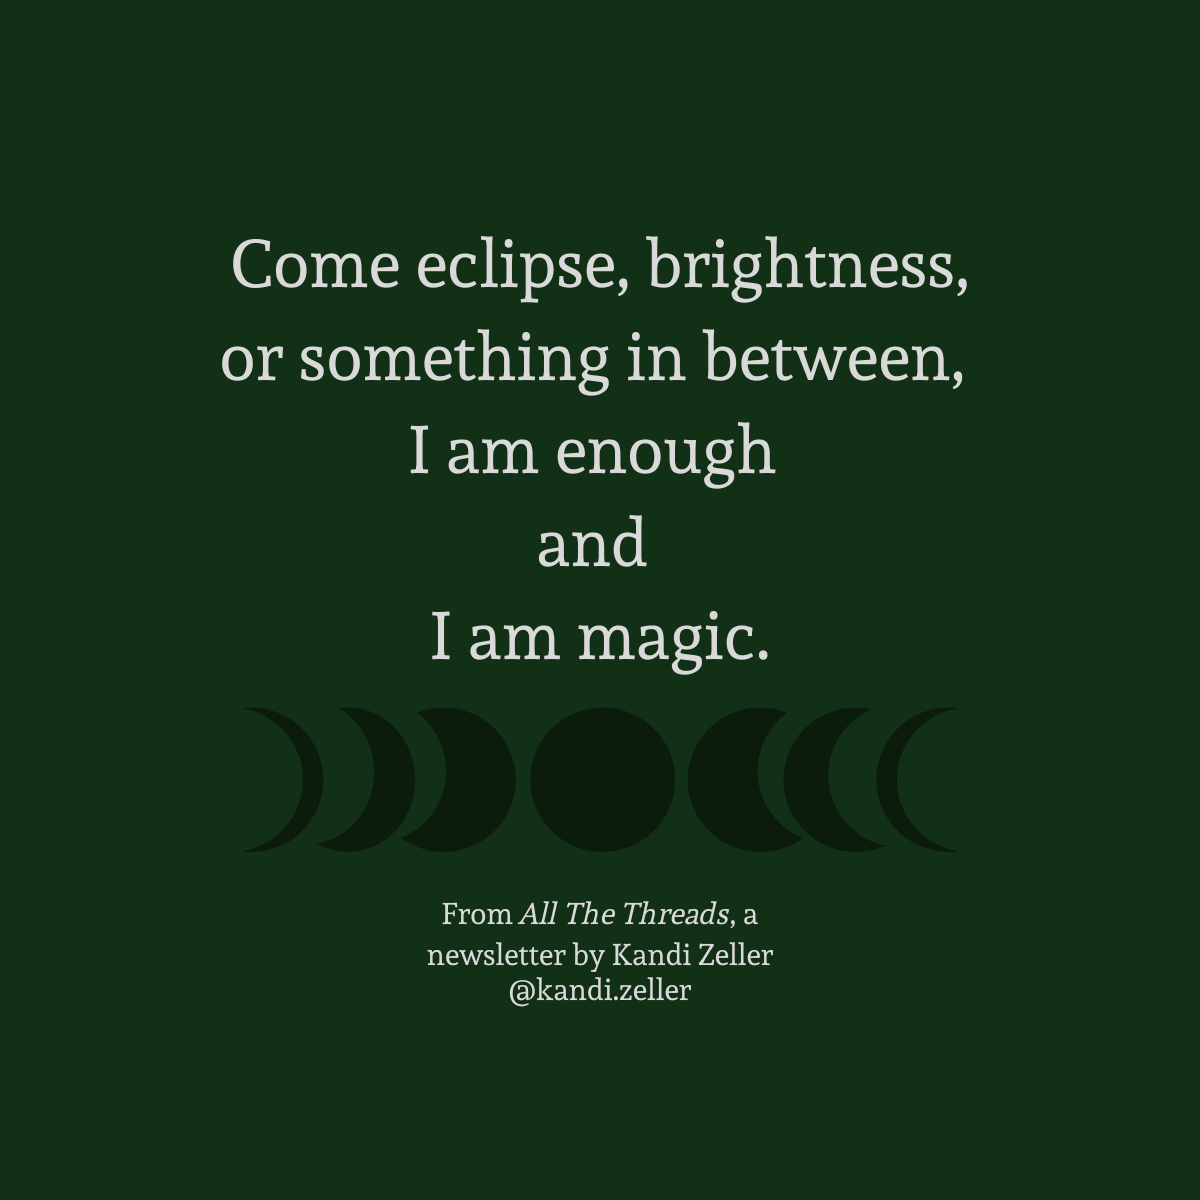 A dark green background with white lettering that reads, “Come eclipse, brightness, or something in between, I am enough and I am magic.” This is followed by a black, translucent representation of the phases of the moon, underneath which are the words, “From All The Threads, a newsletter by Kandi Zeller, @Kandi.Zeller”